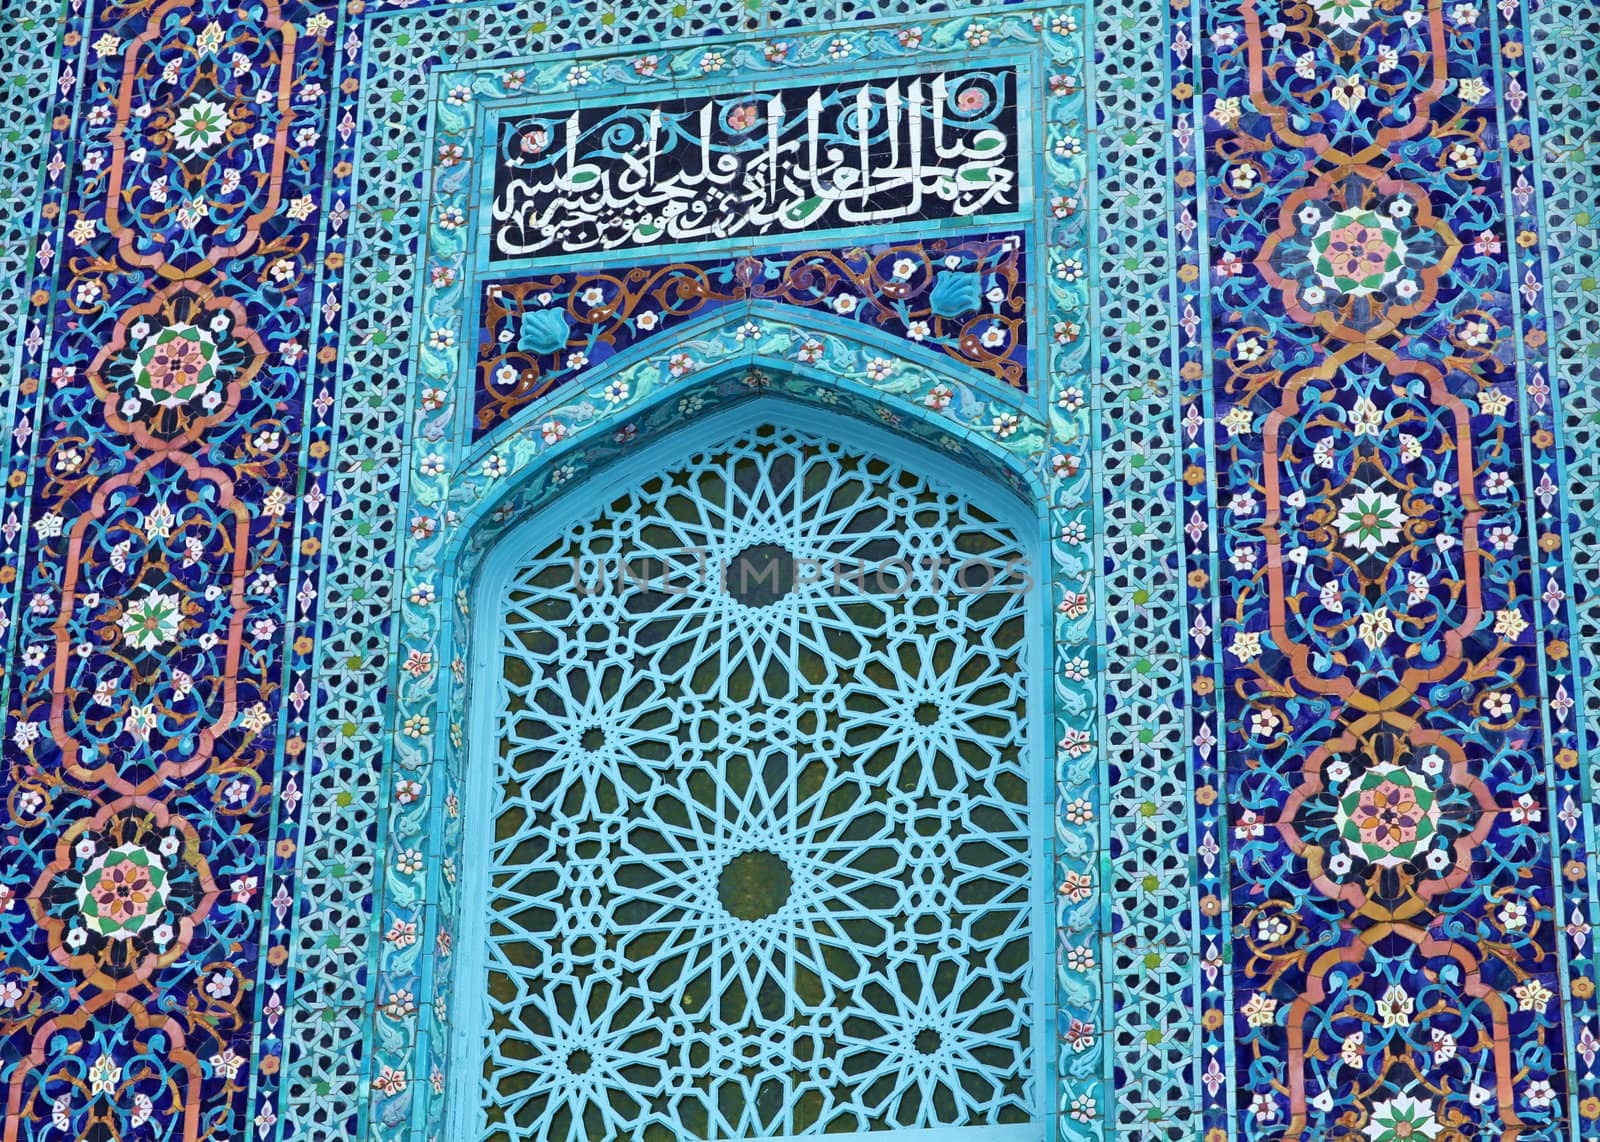  mosaic fragment on the wall of the mosque